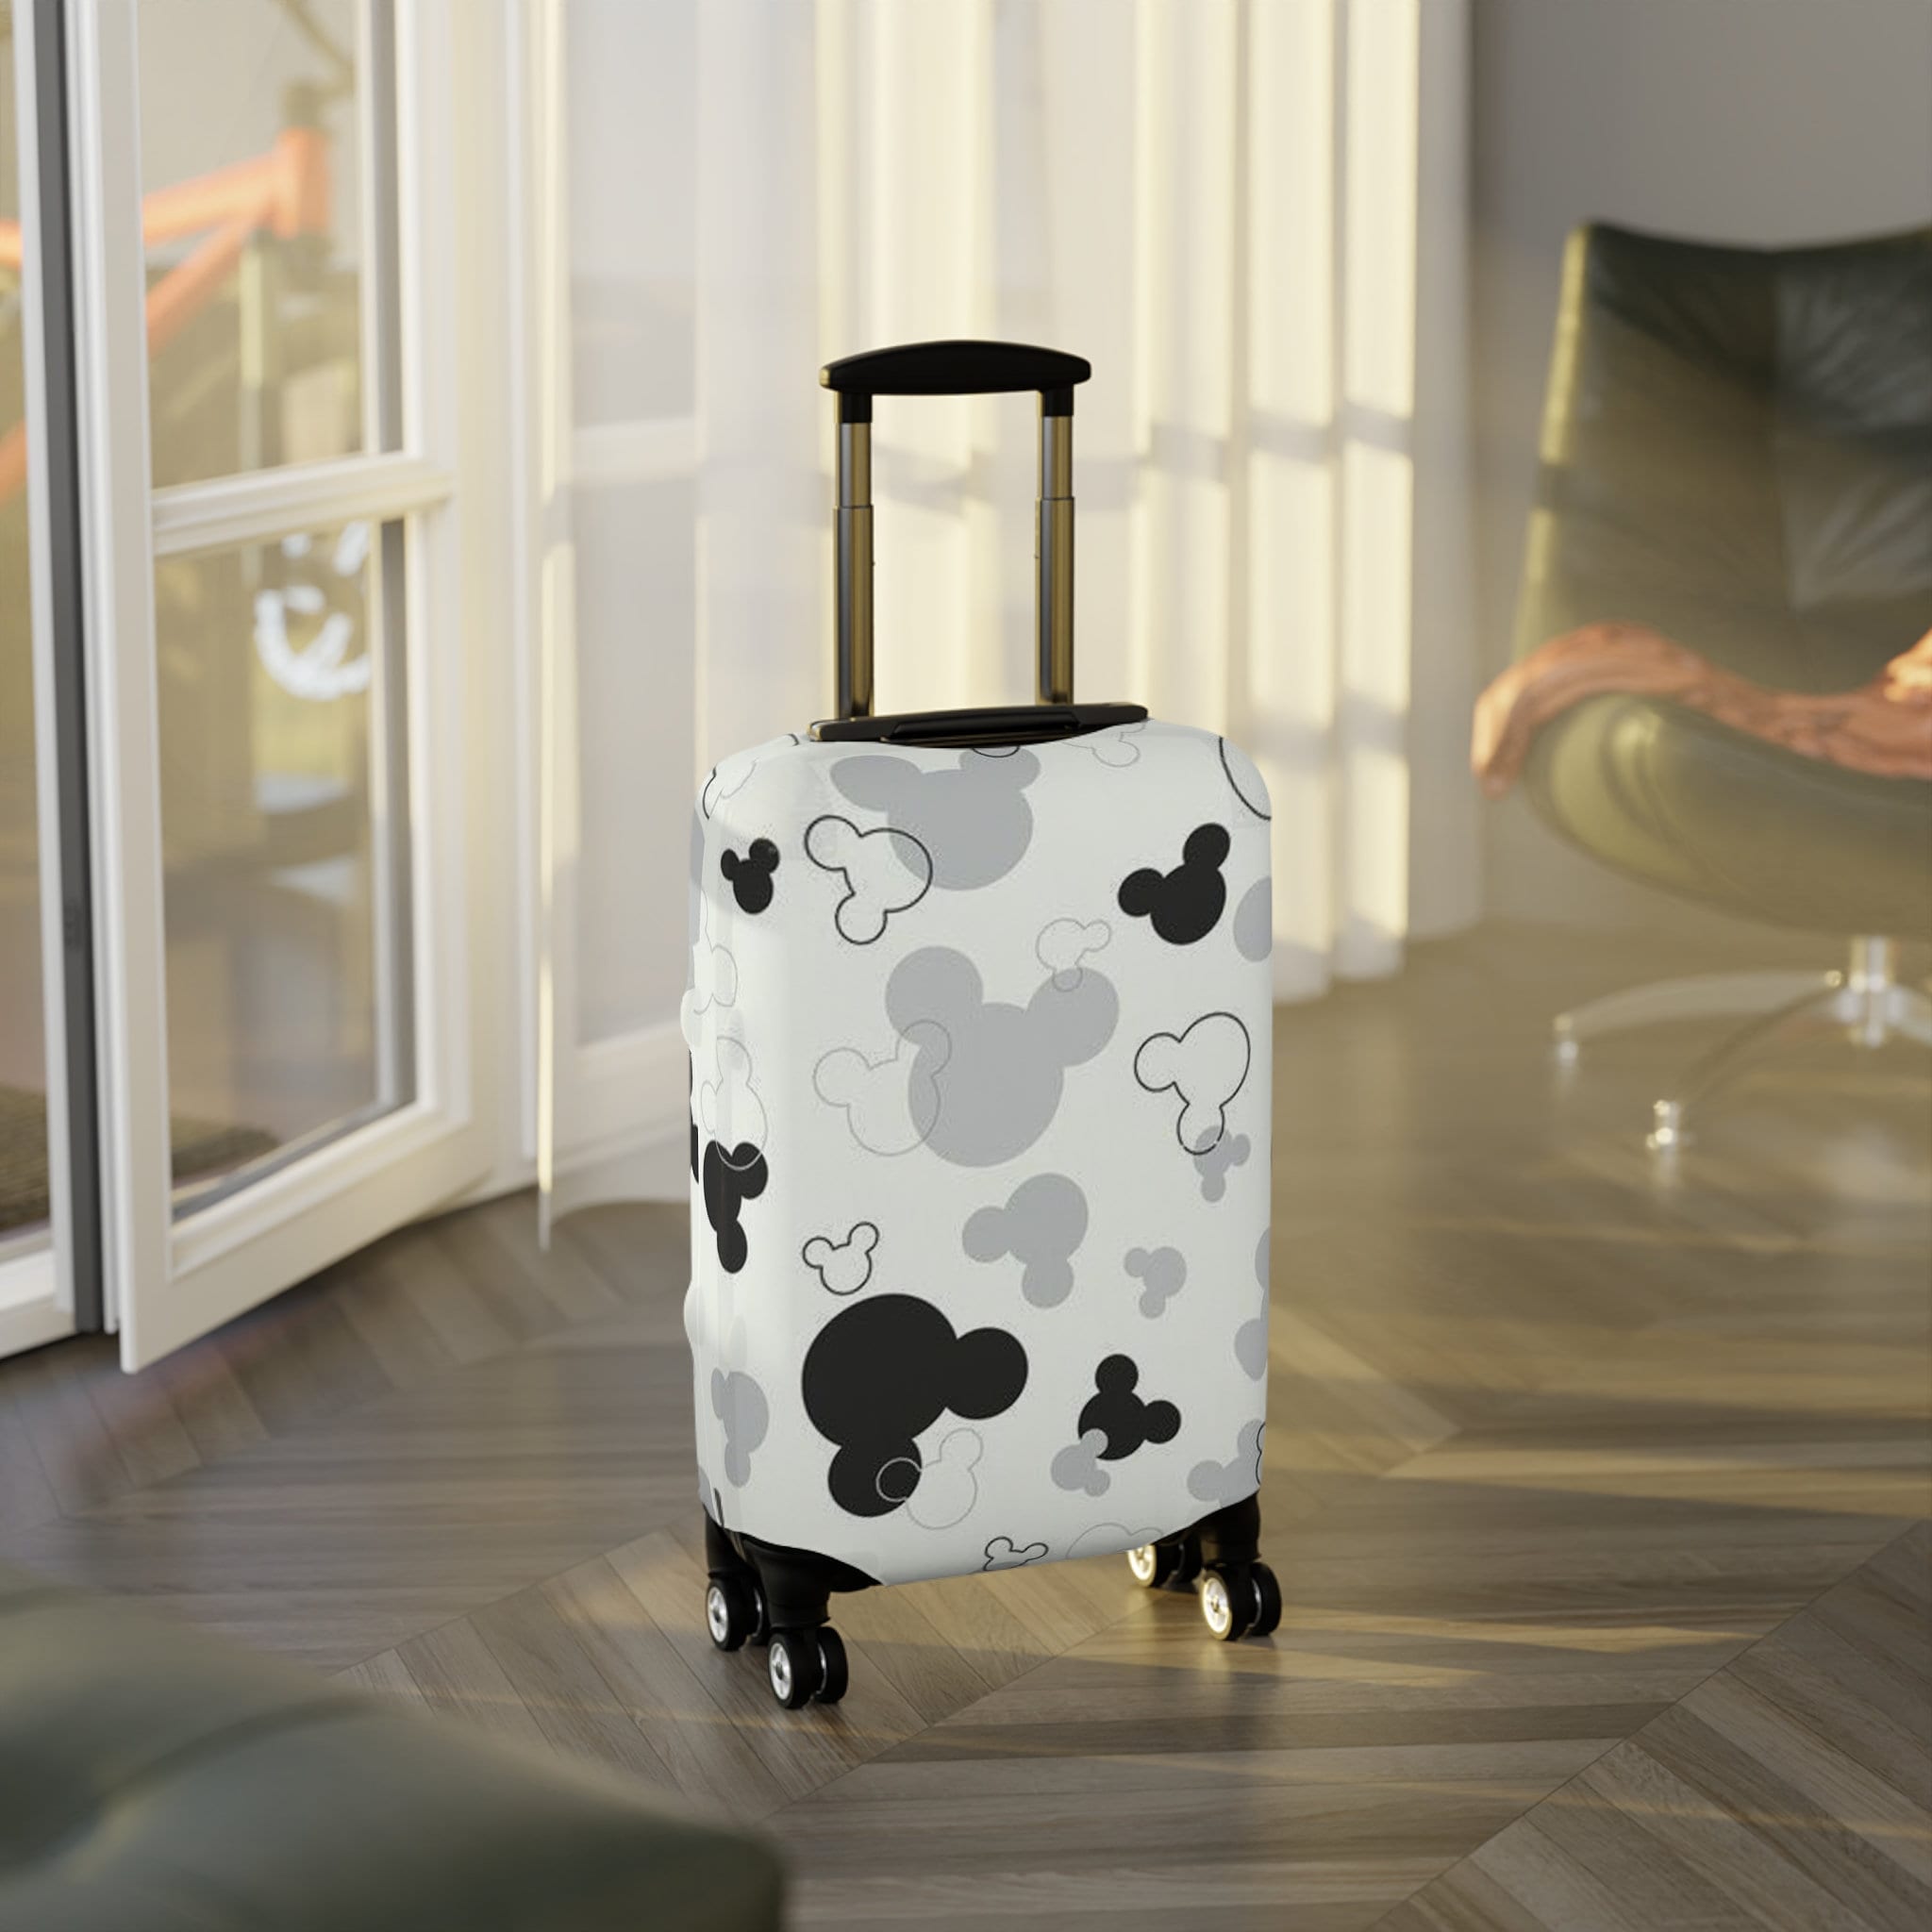 Mickey Mouse Disney Luggage Cover, Magic Kingdom Luggage, Disney Luggage